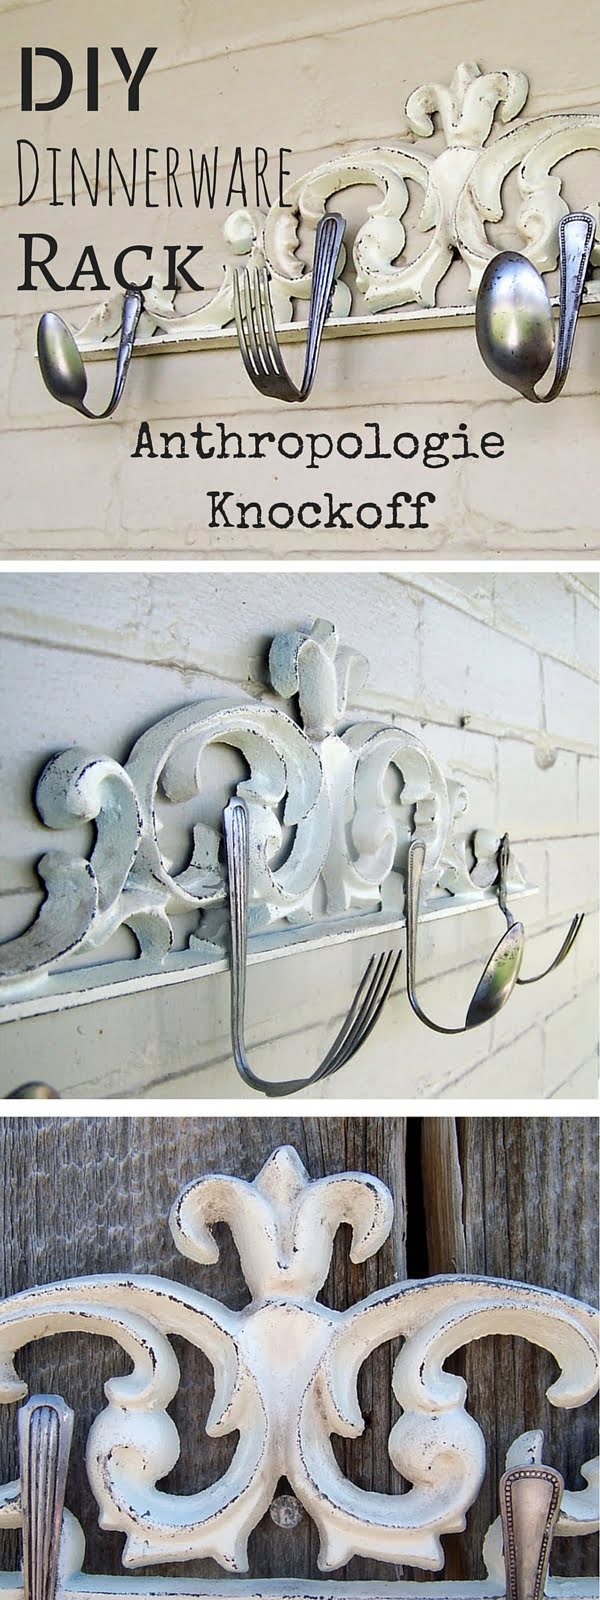 Check out the tutorial:  Anthropologie Dinnerware Rack Knockoff  